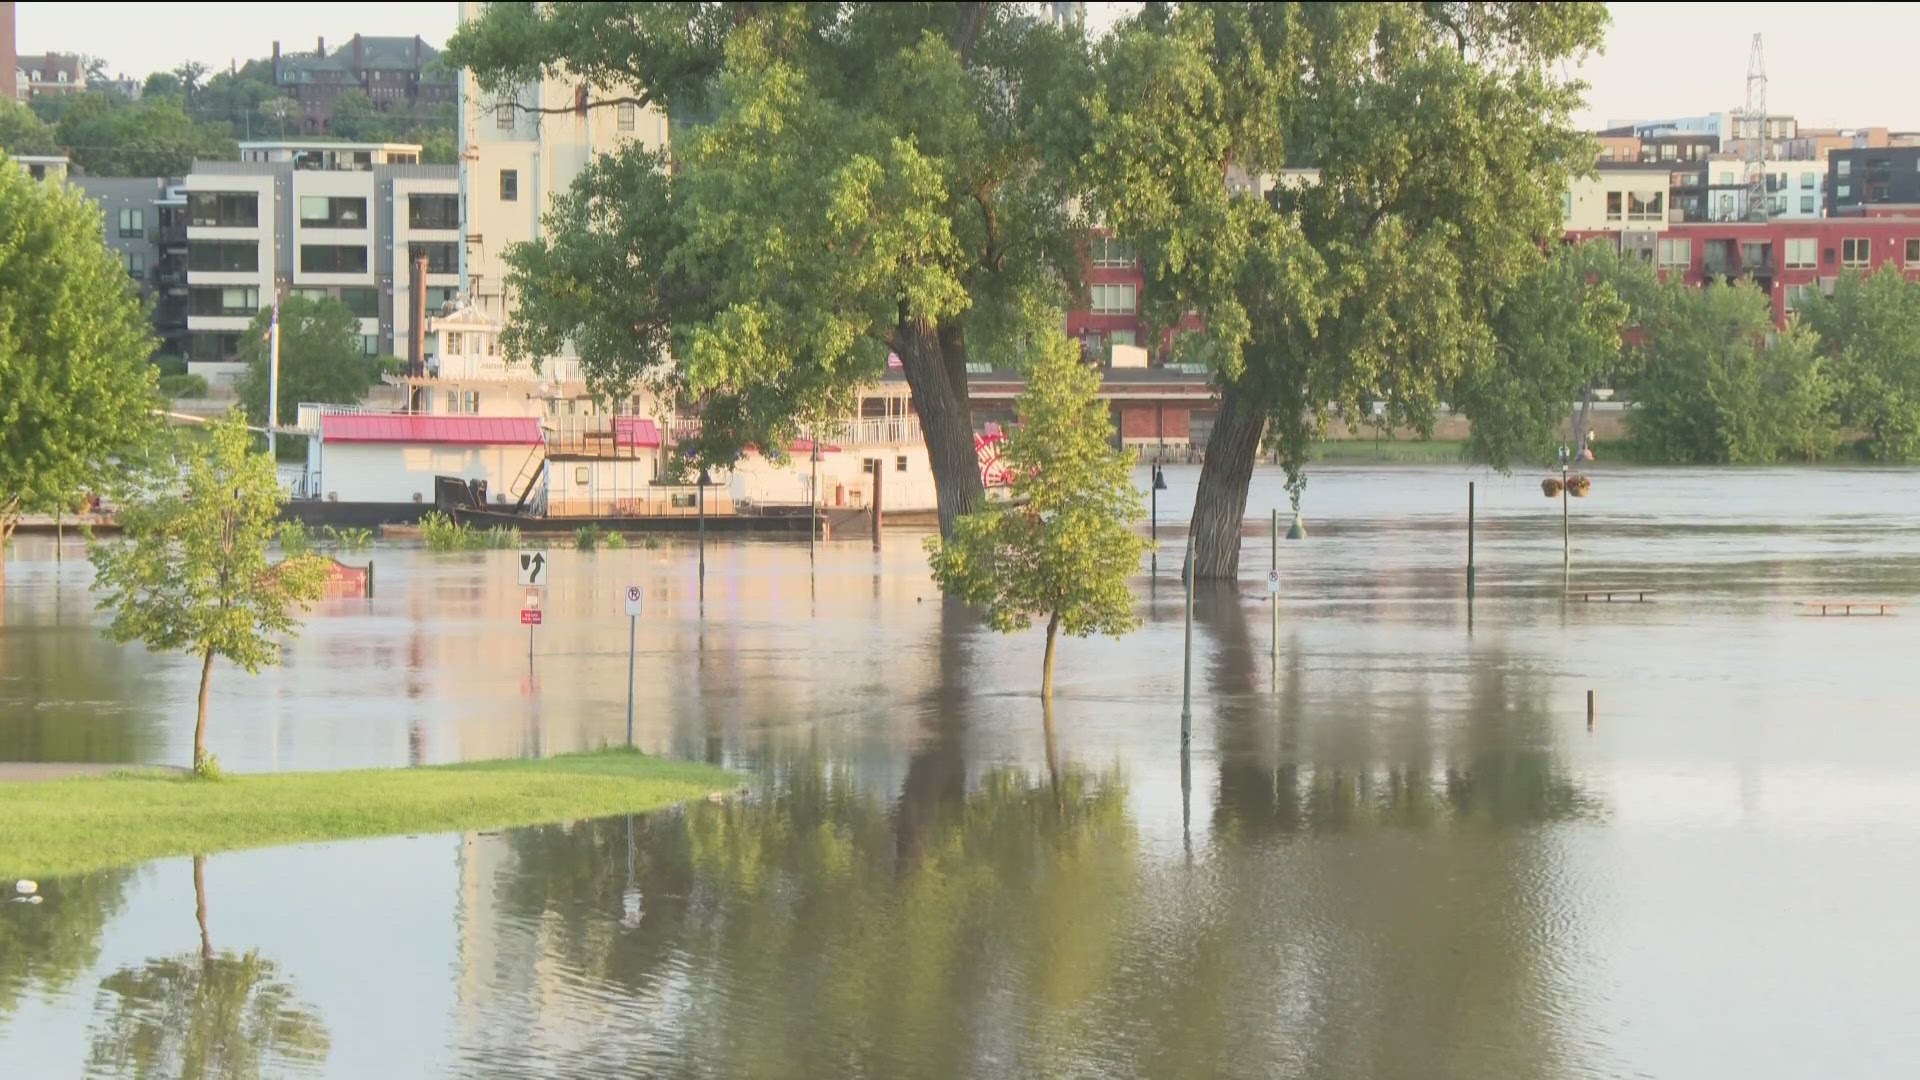 The river levels are at more than 19 feet and are expected to rise this weekend.